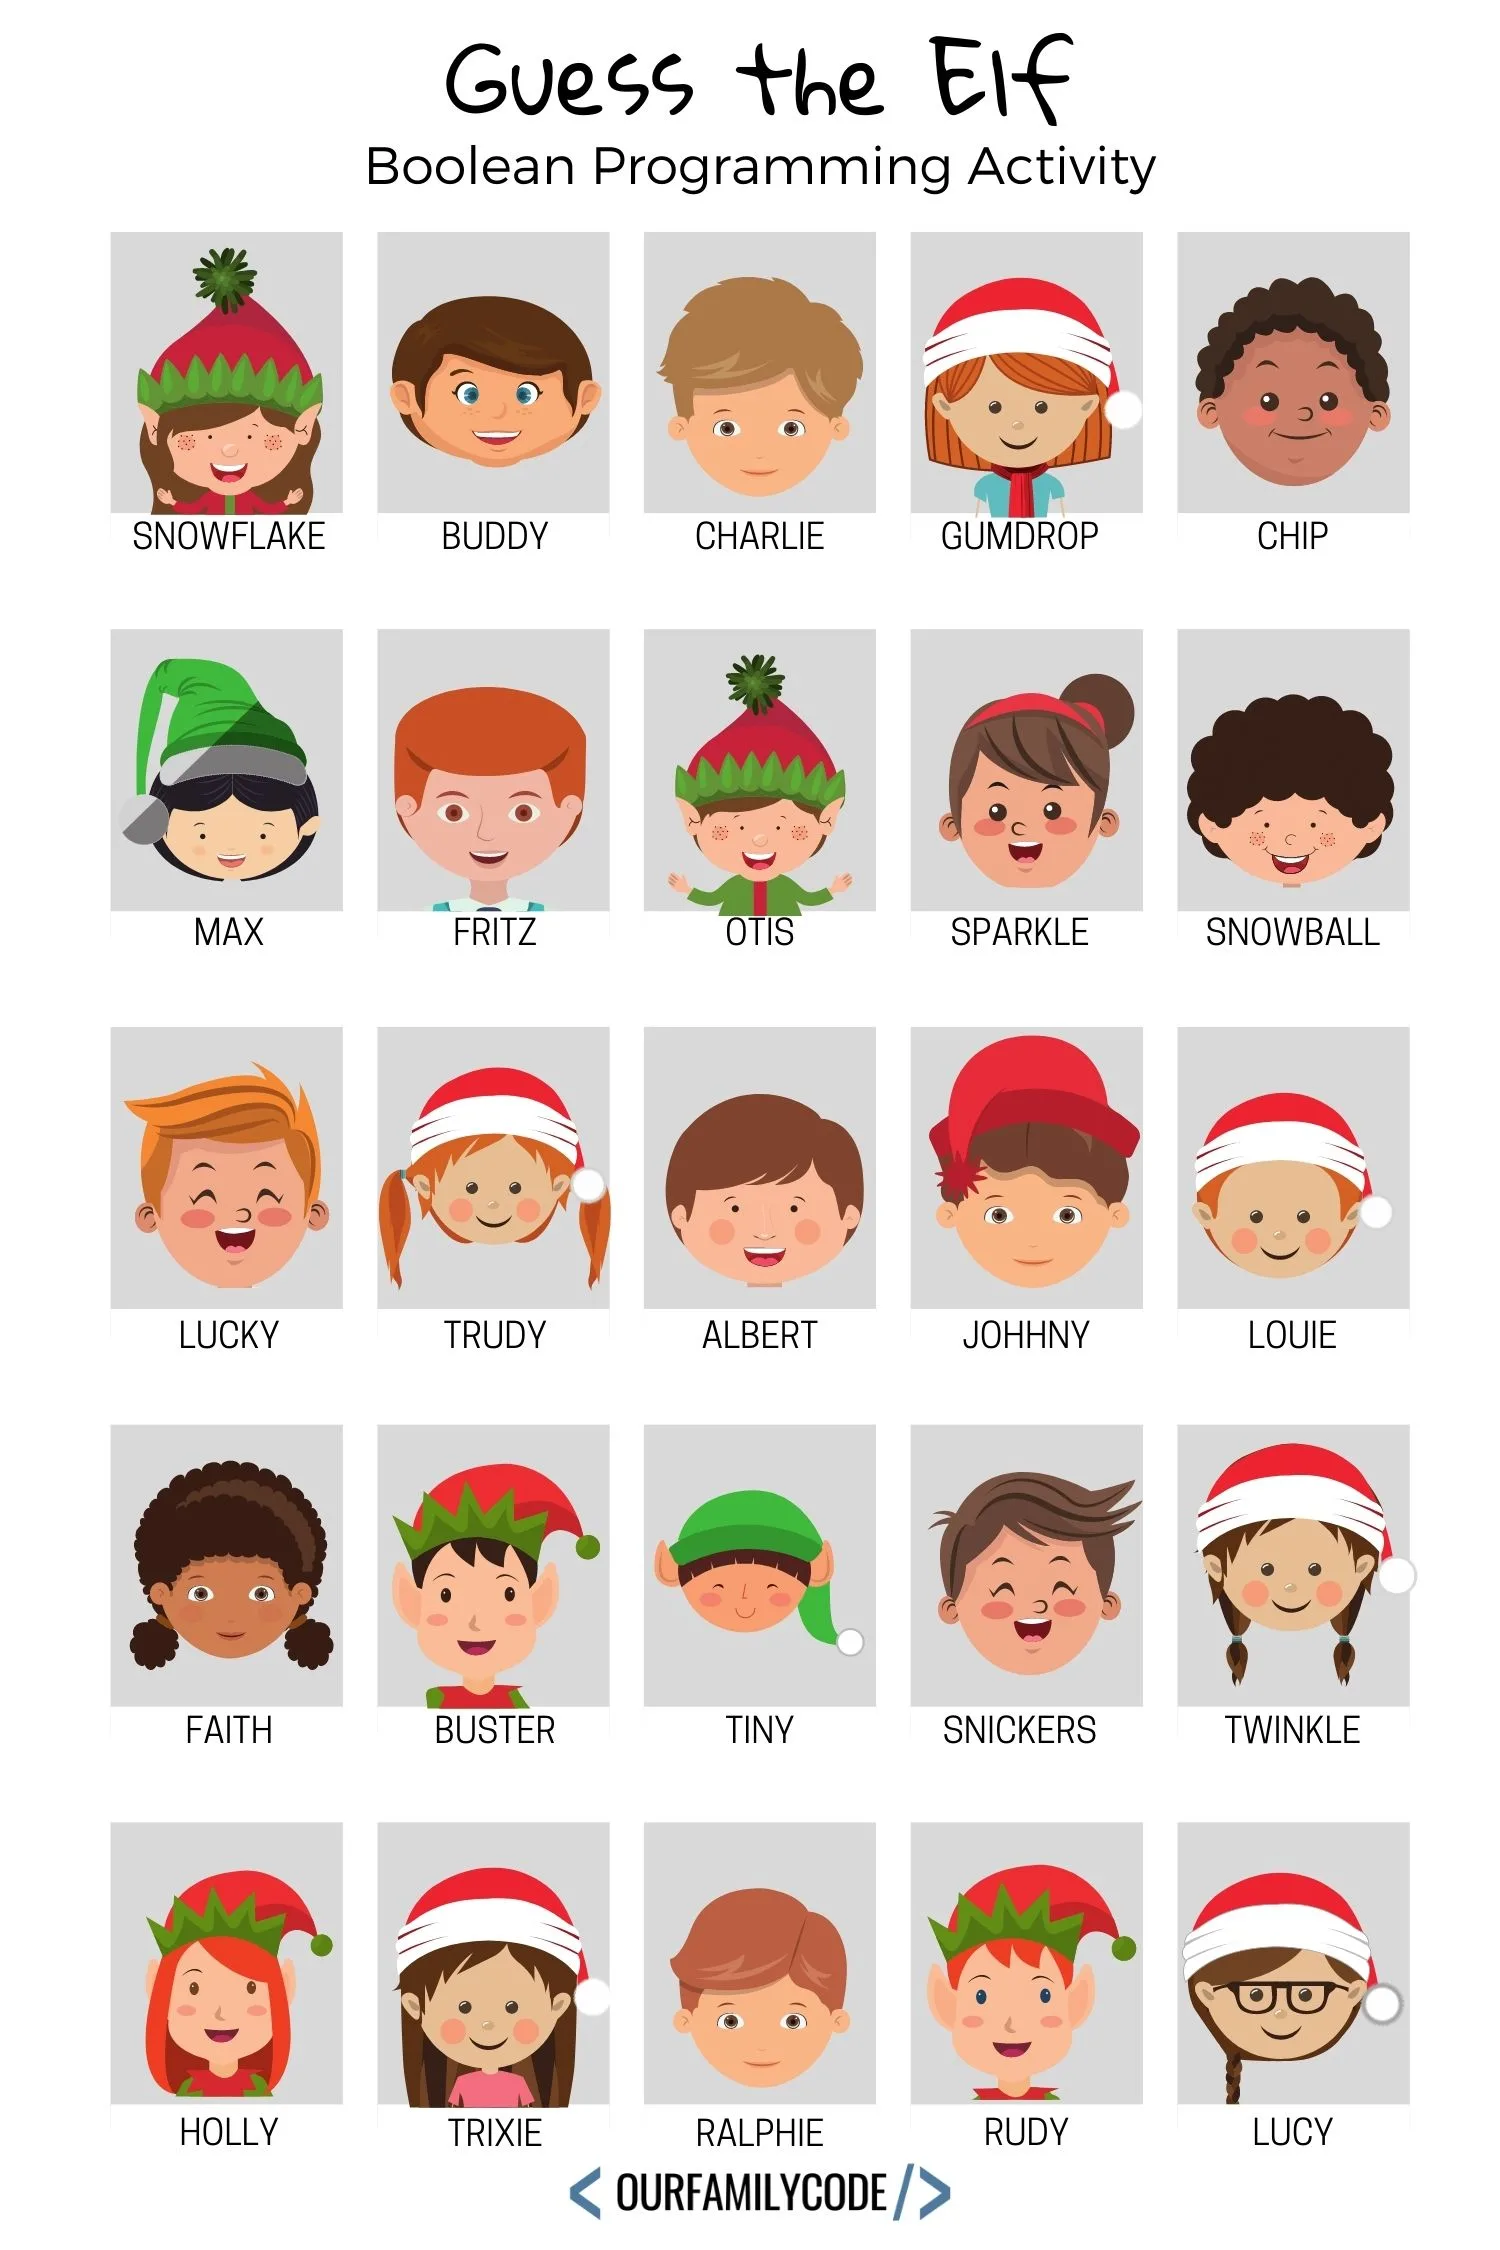 Guess Who? Santa's Elves Boolean Coding Activity game board.